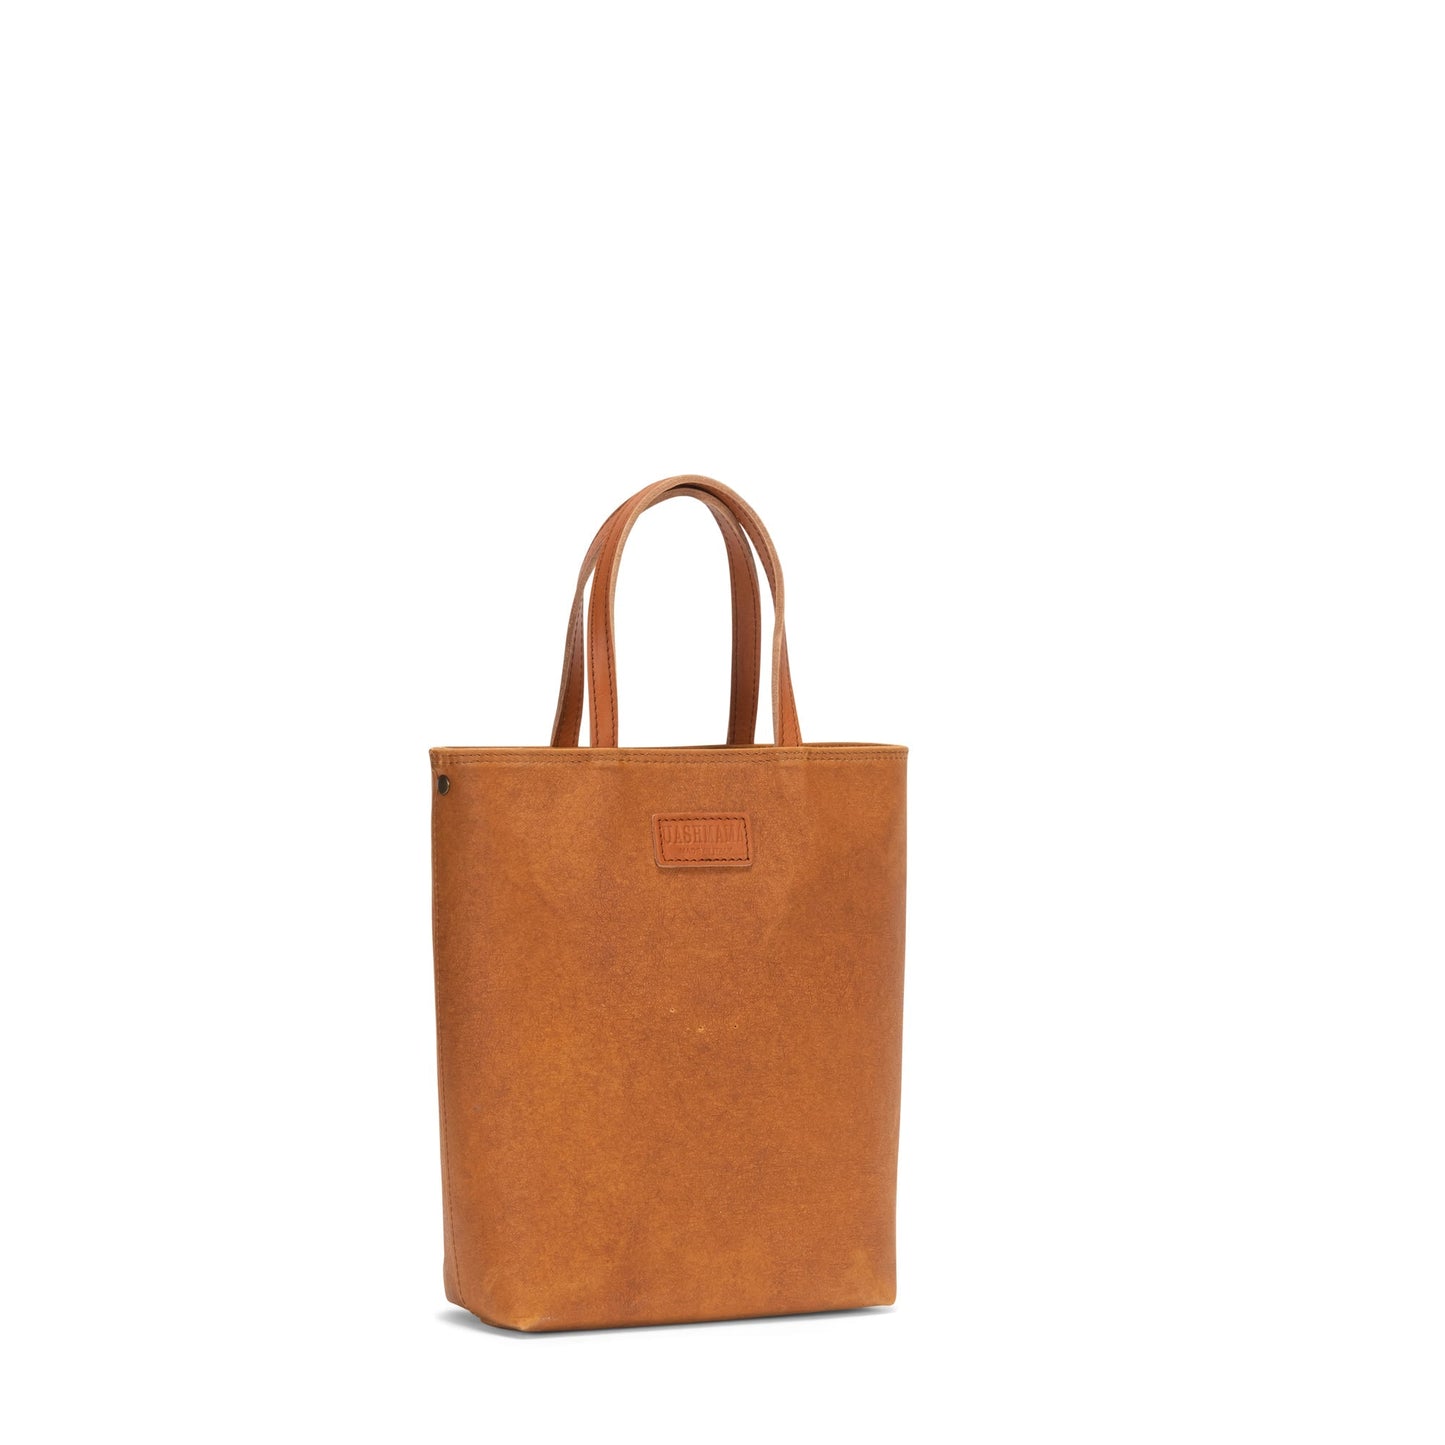 A washable paper tote bag is shown from a 3/4 angle, with the strap removed. It features two long top handles. It is tan in colour.